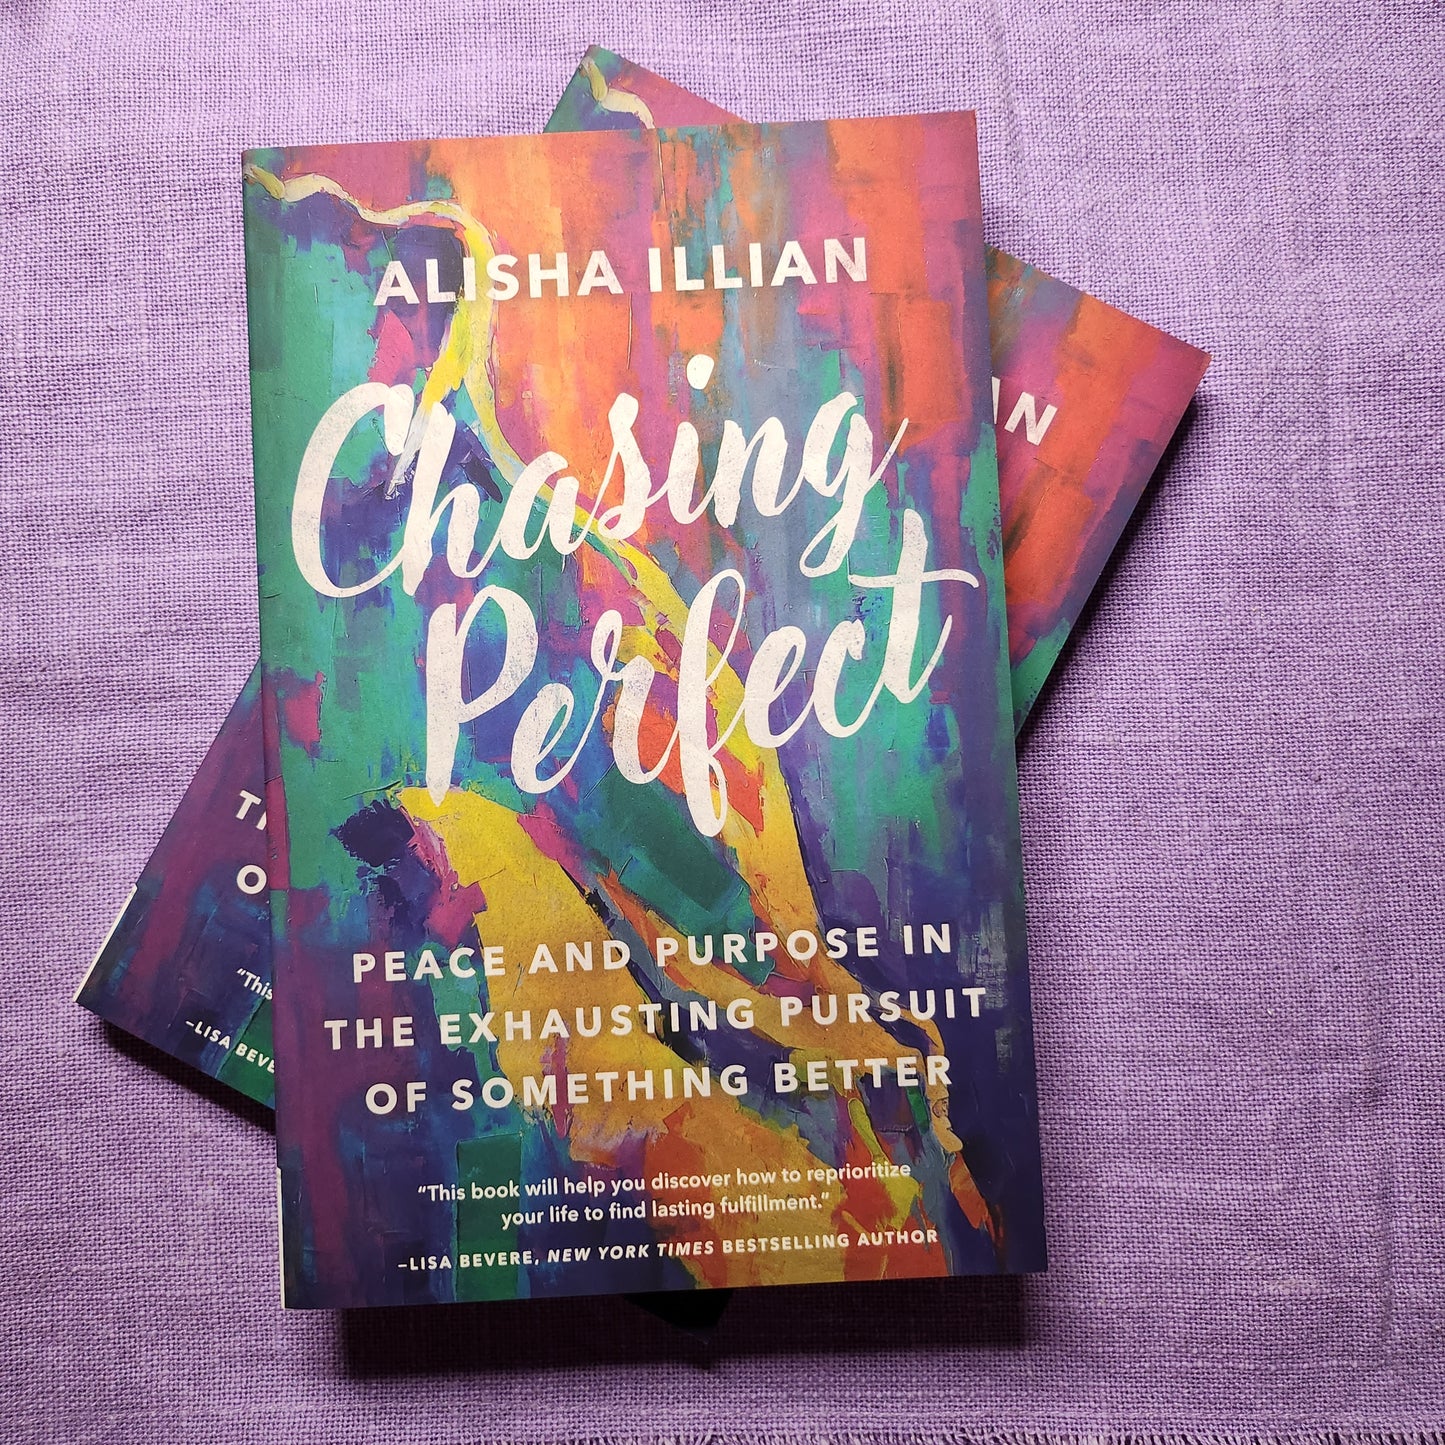 Chasing Perfect: Peace and Purpose in the Exhausting Pursuit of Something Better